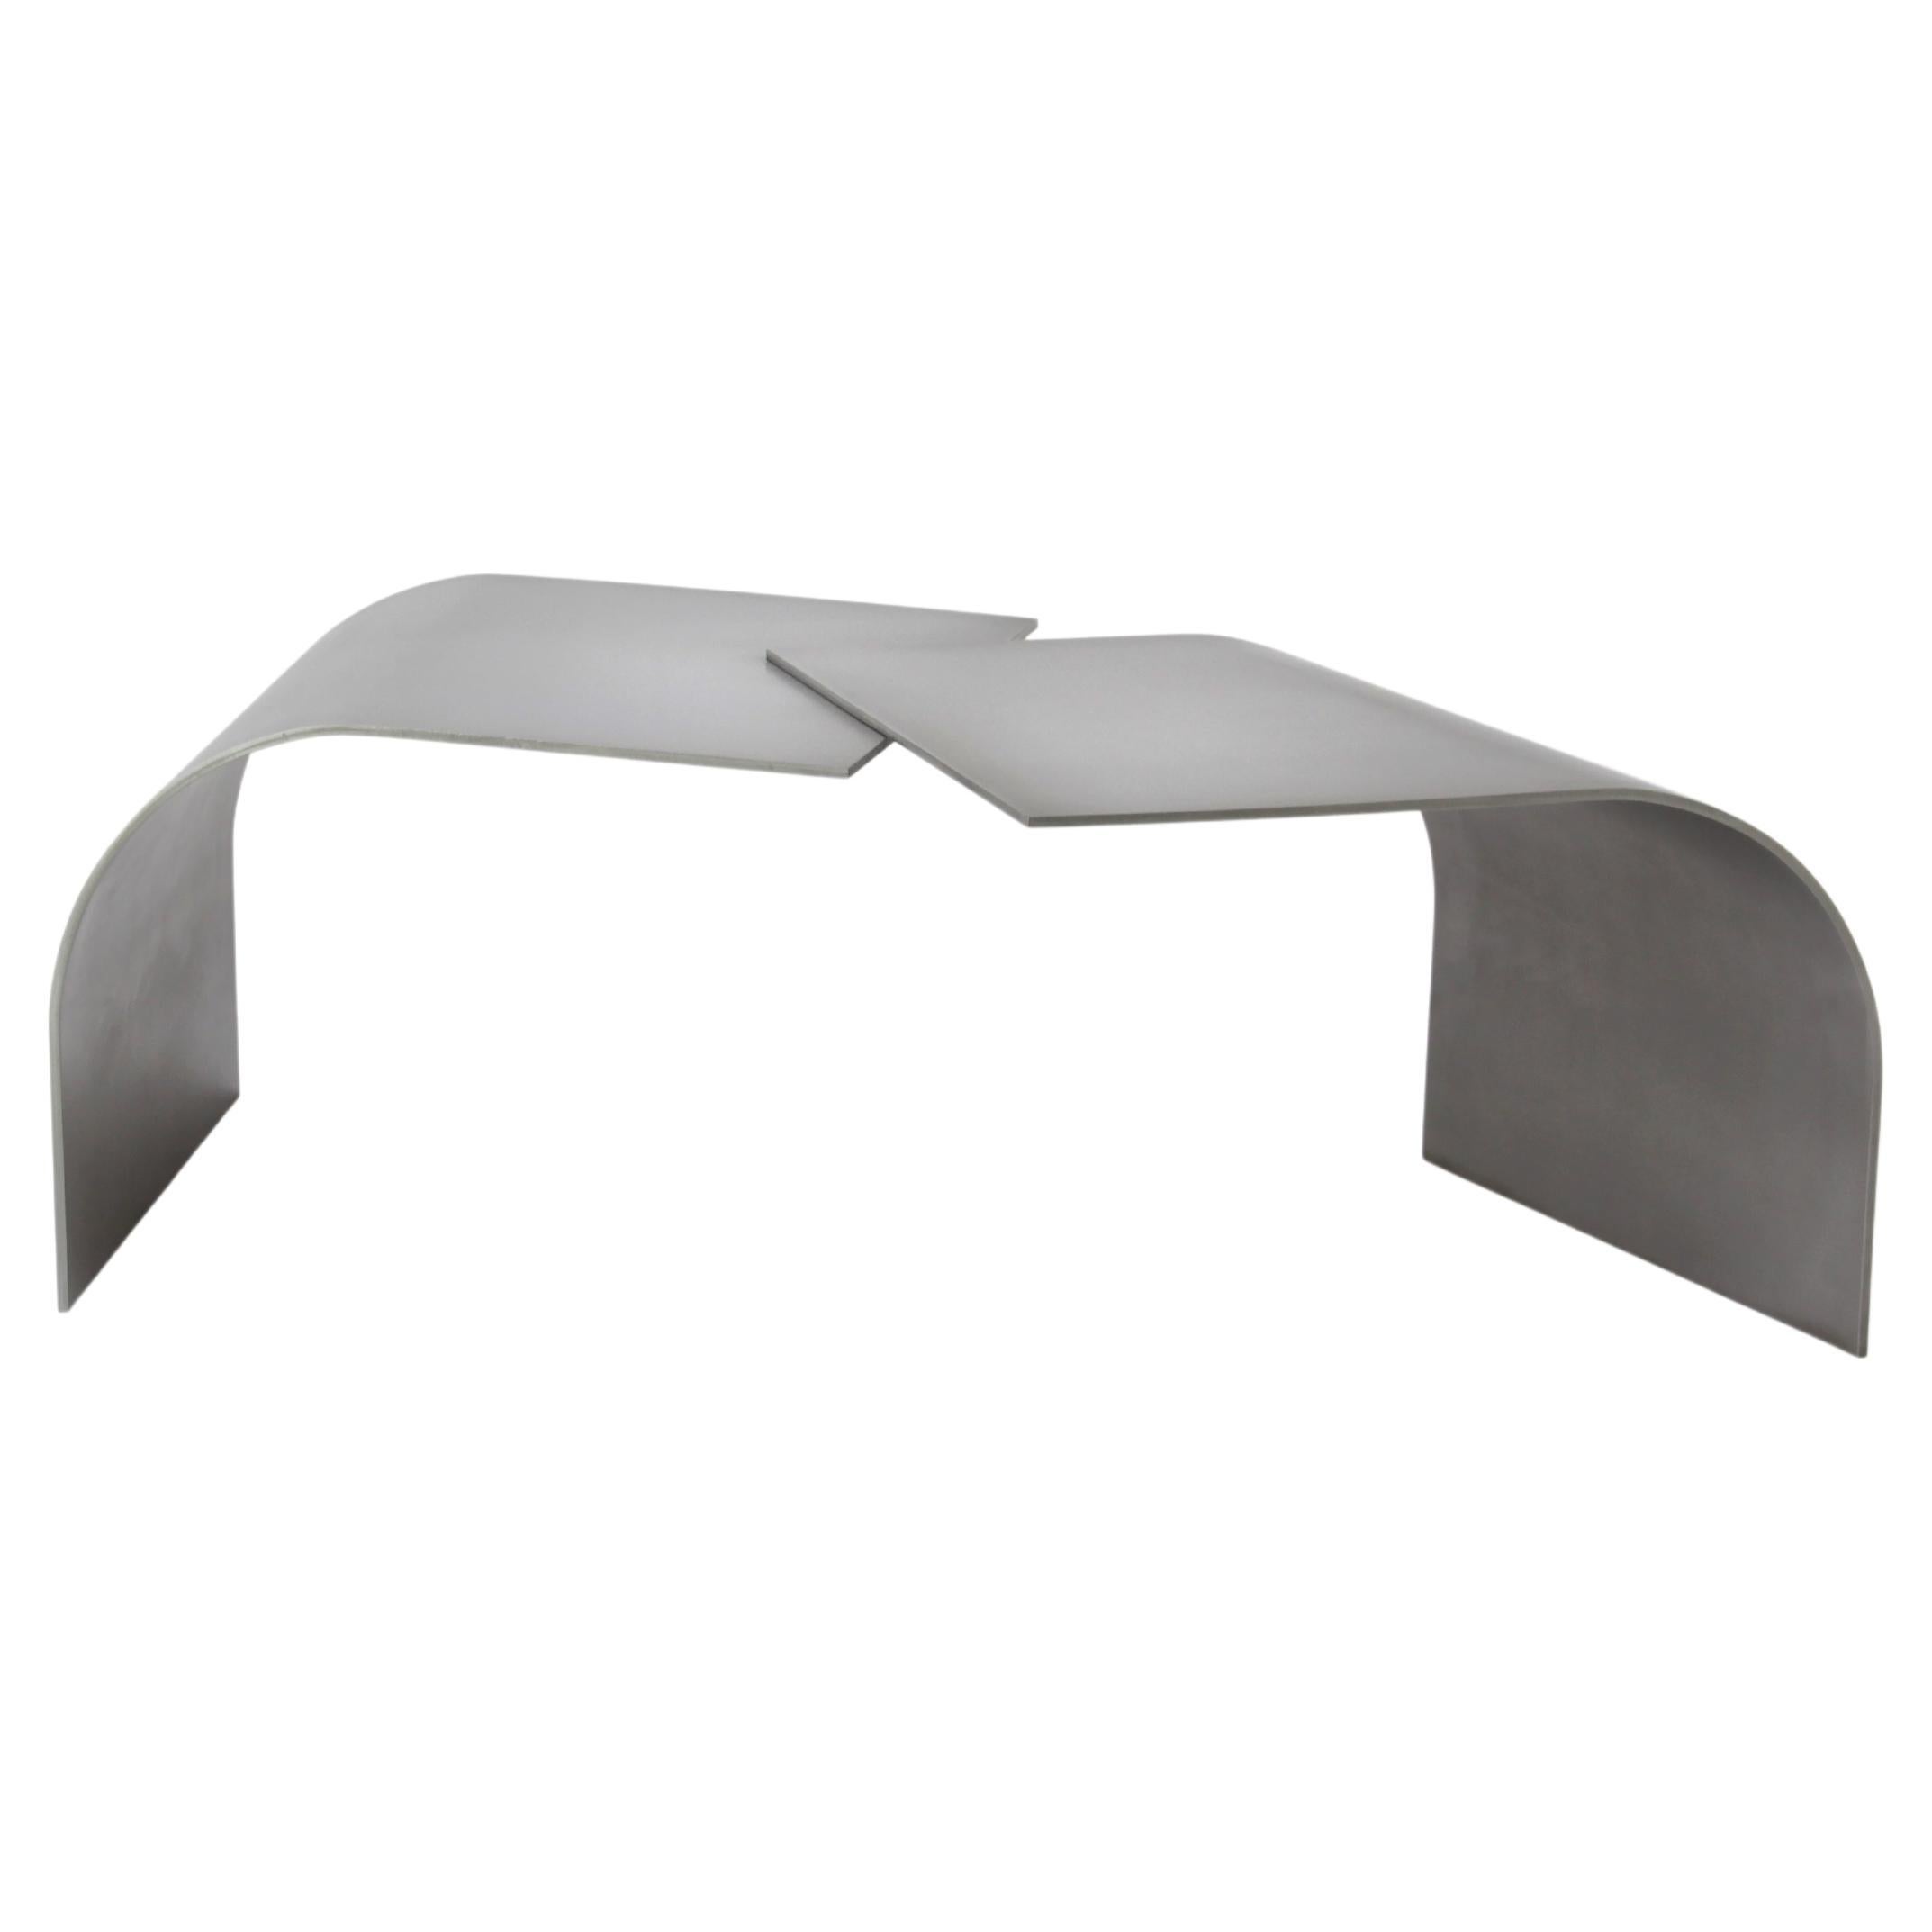 Contemporary, minimalist grey stainless steel Wals low table by Maria Tyakina